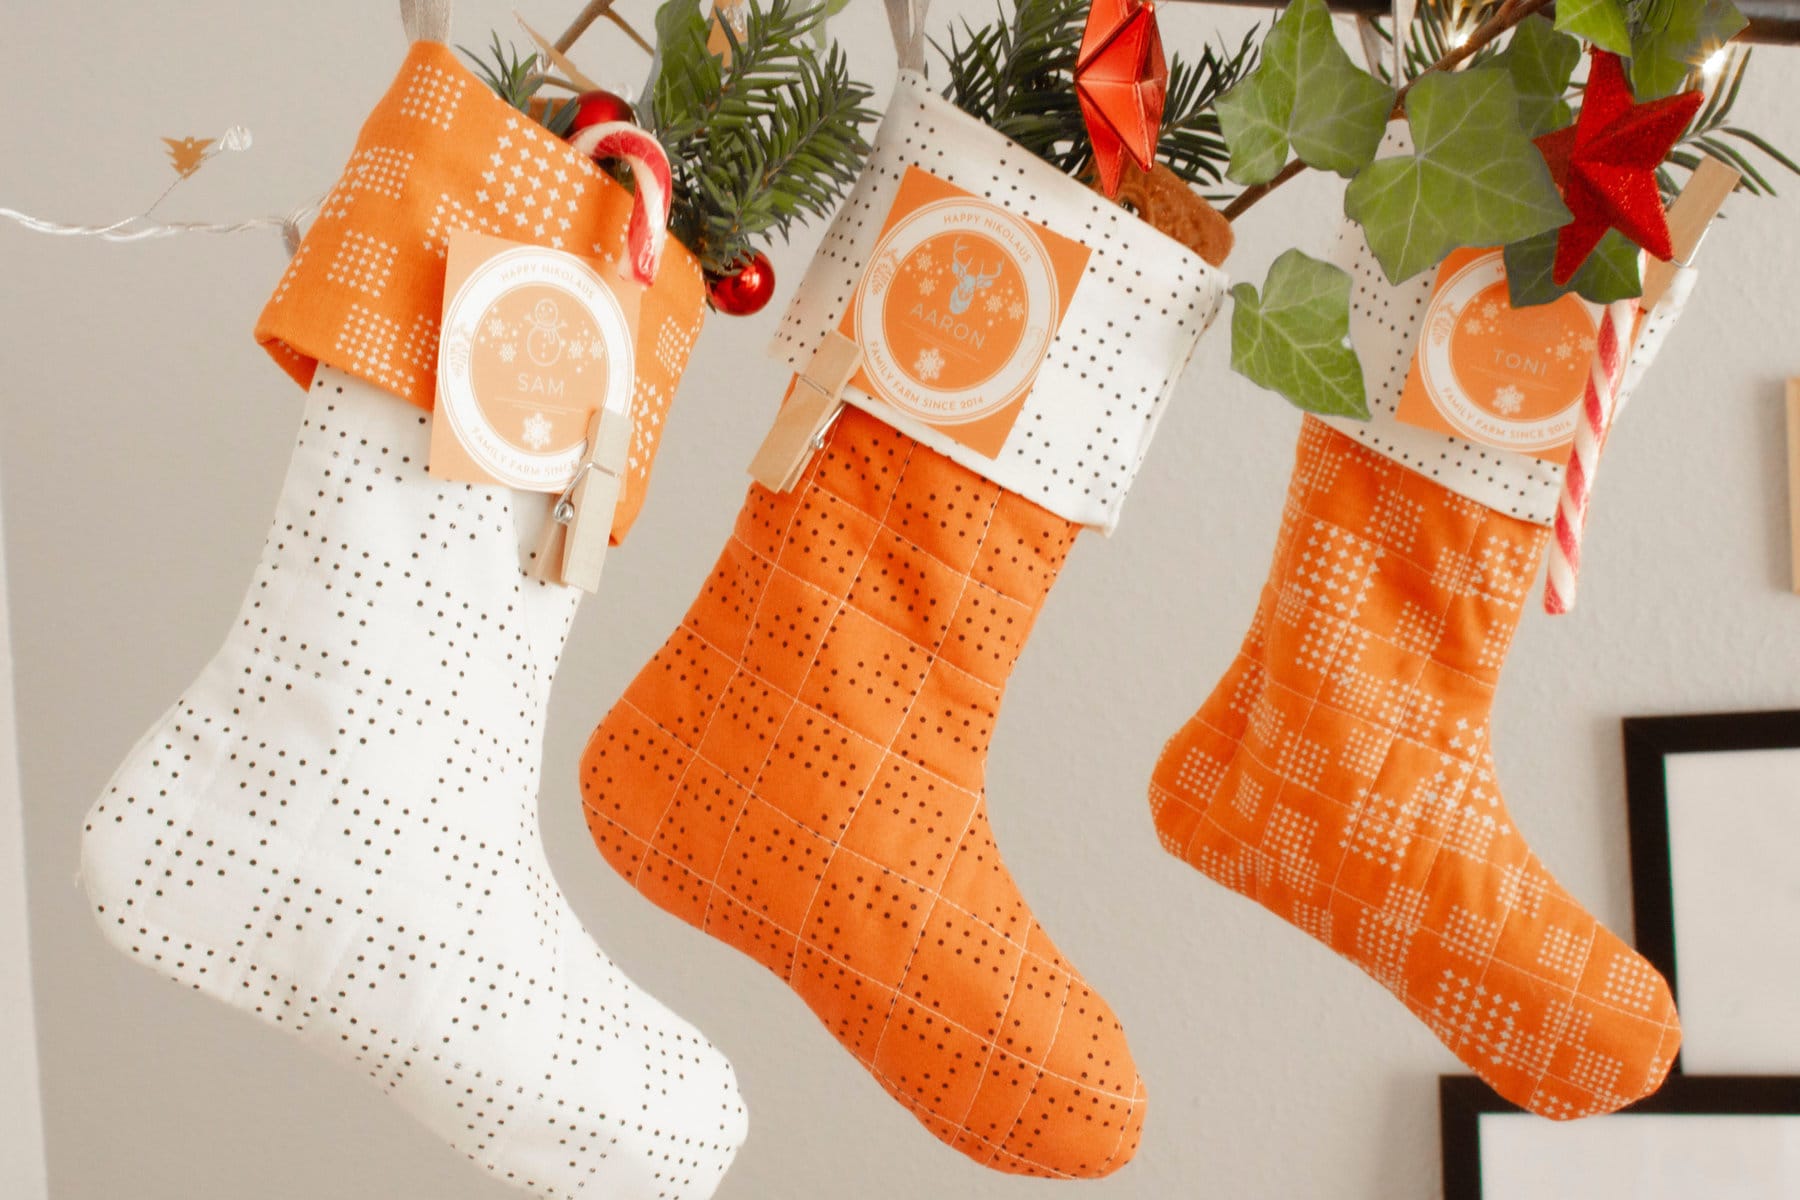 stockings made with Zen Chic's Free Christmas stocking pattern